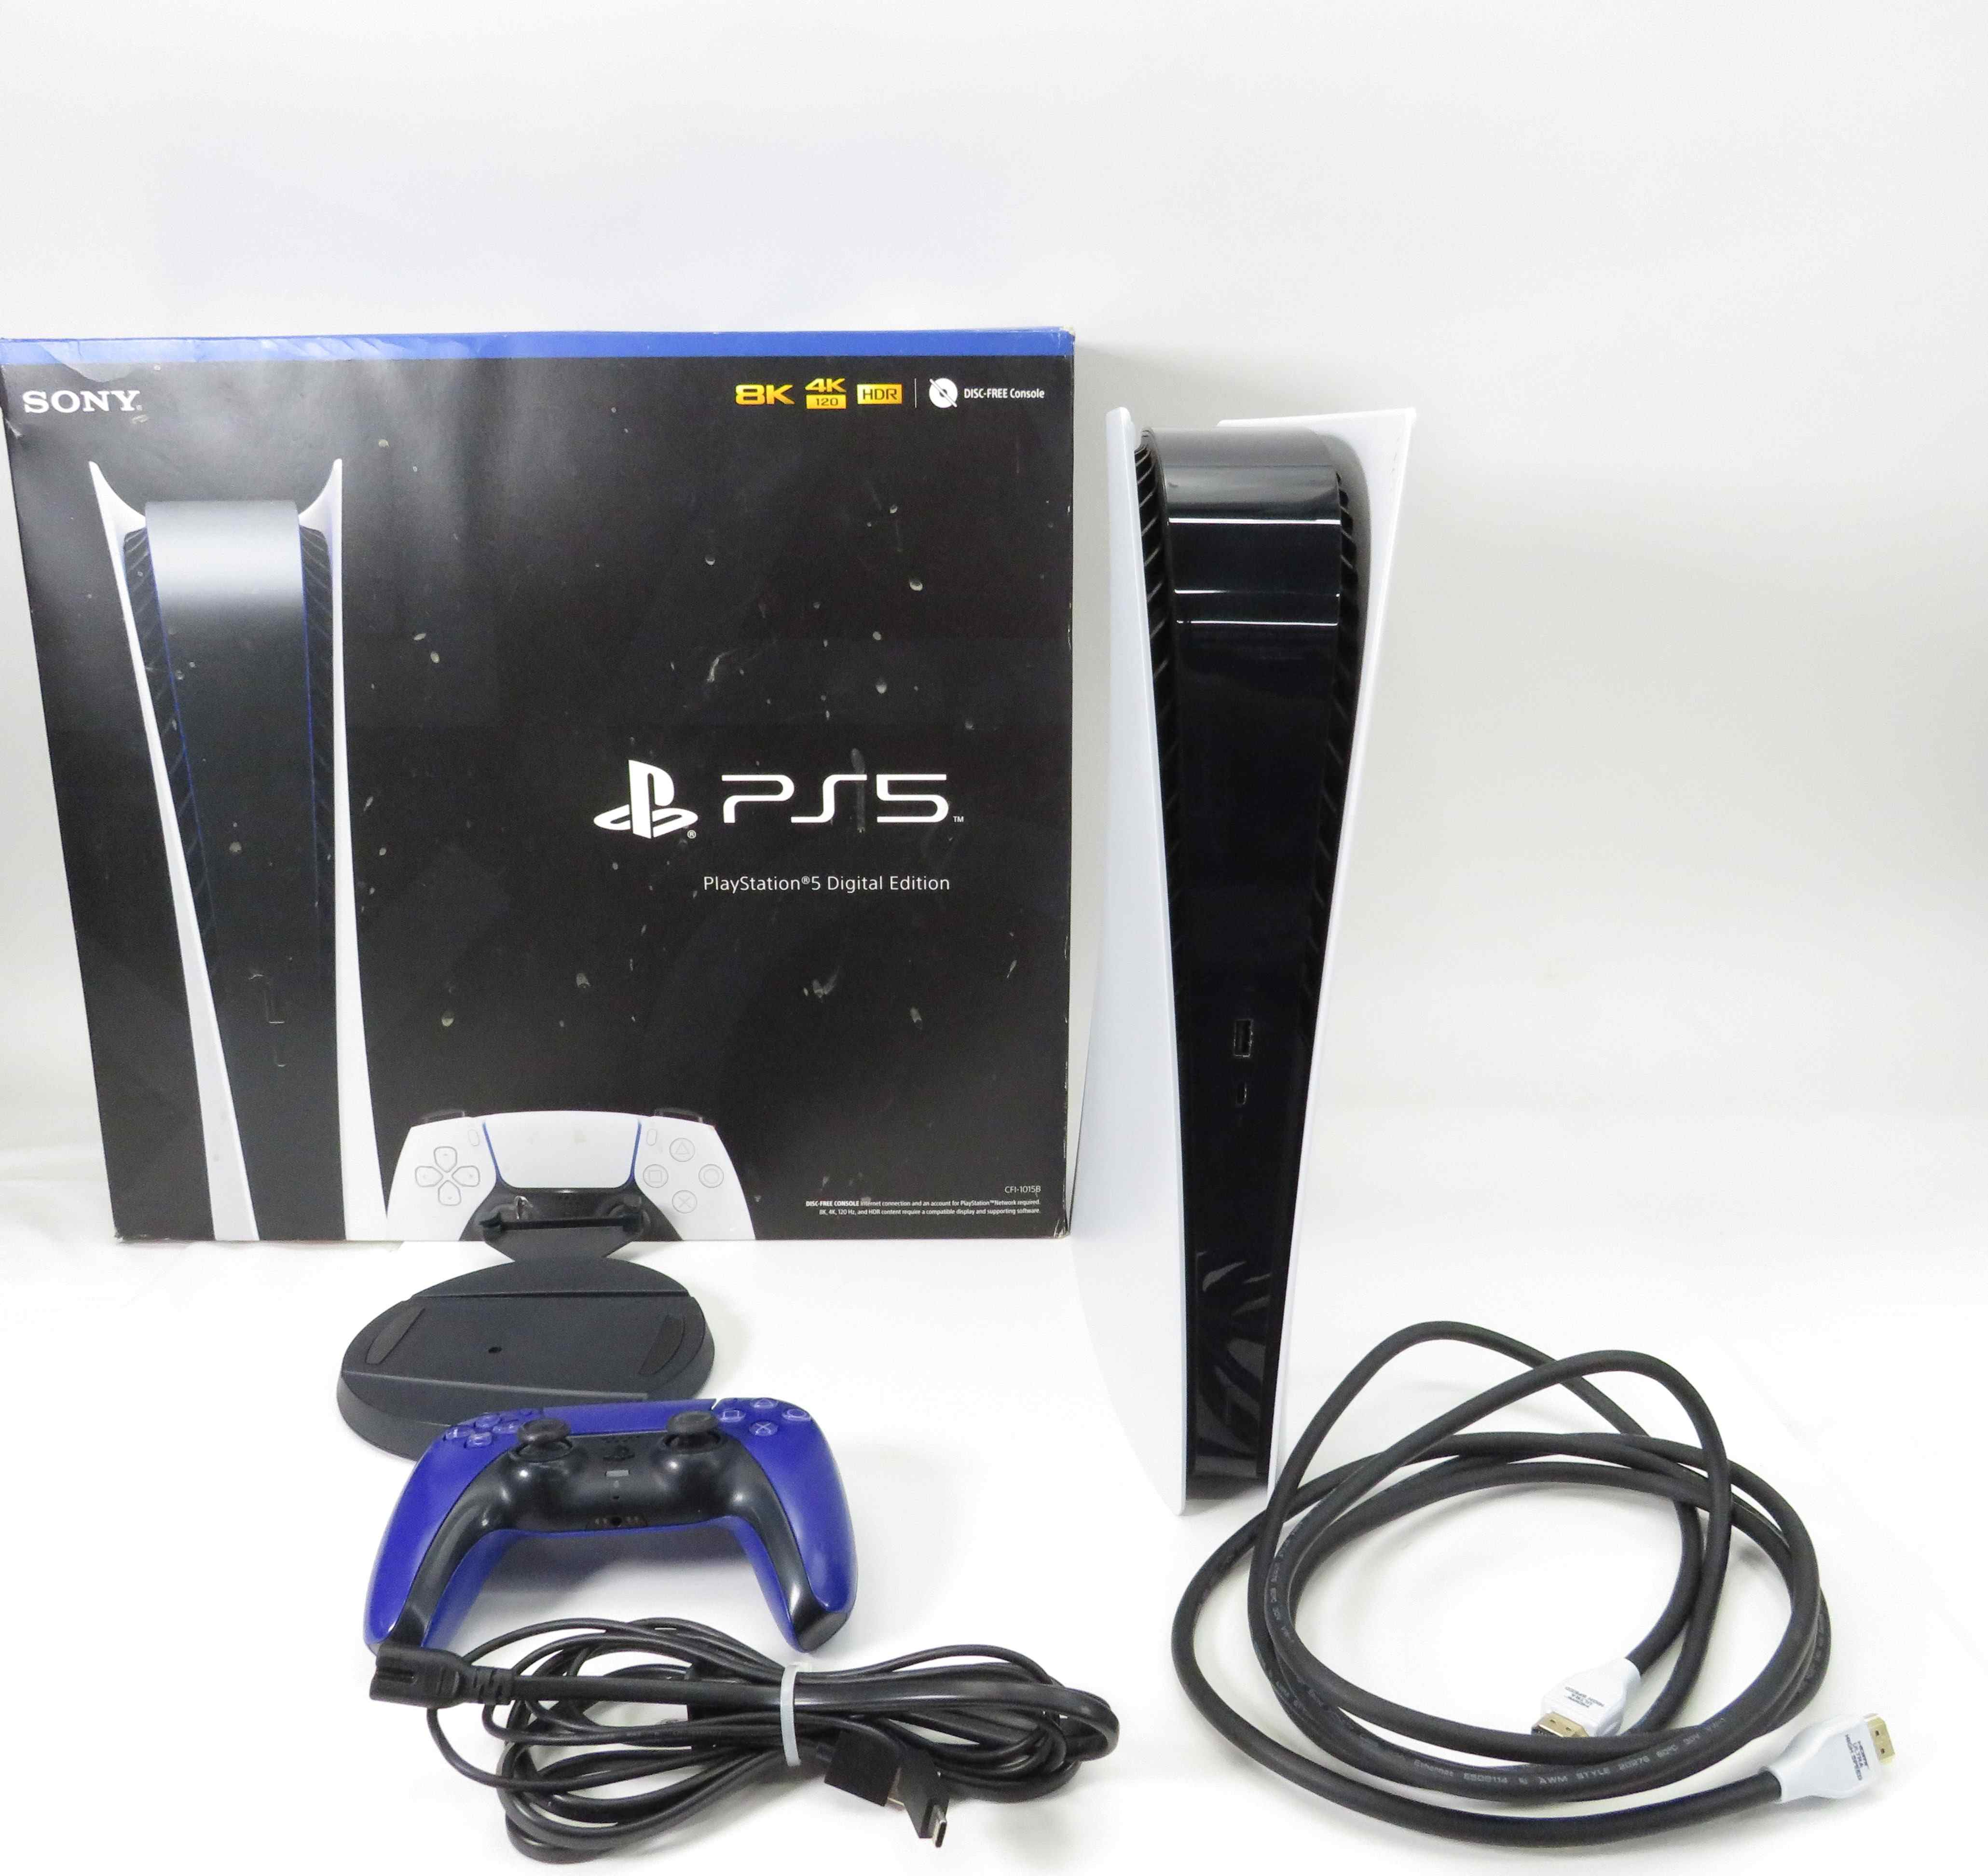 Sony PlayStation 5 PS5 Digital Edition Version Video Game Console